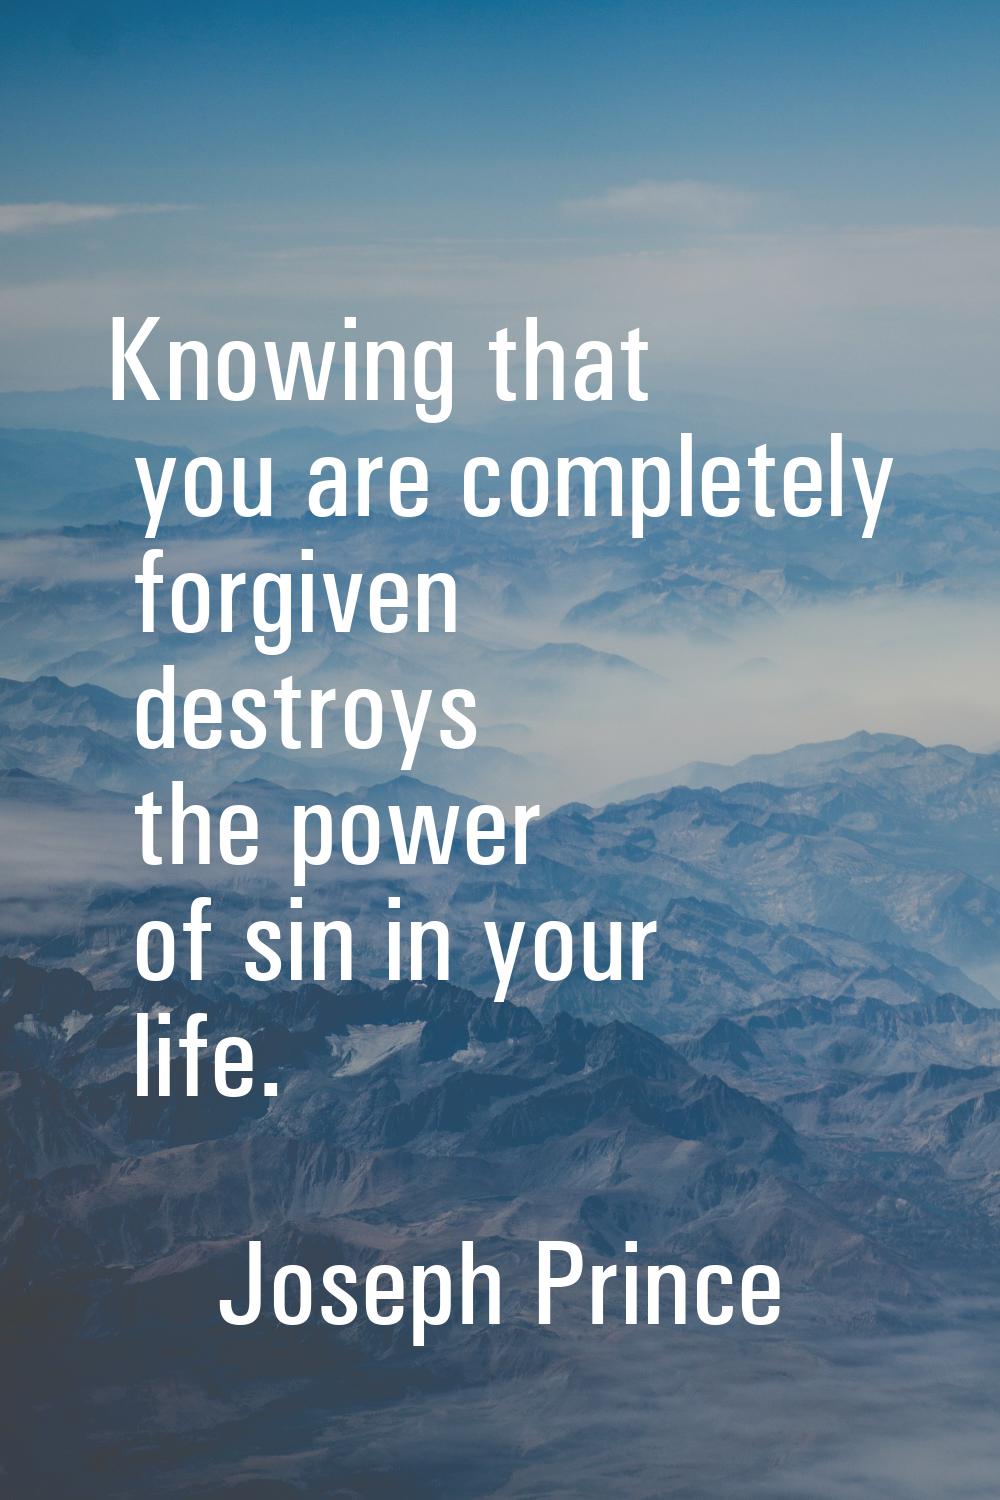 Knowing that you are completely forgiven destroys the power of sin in your life.